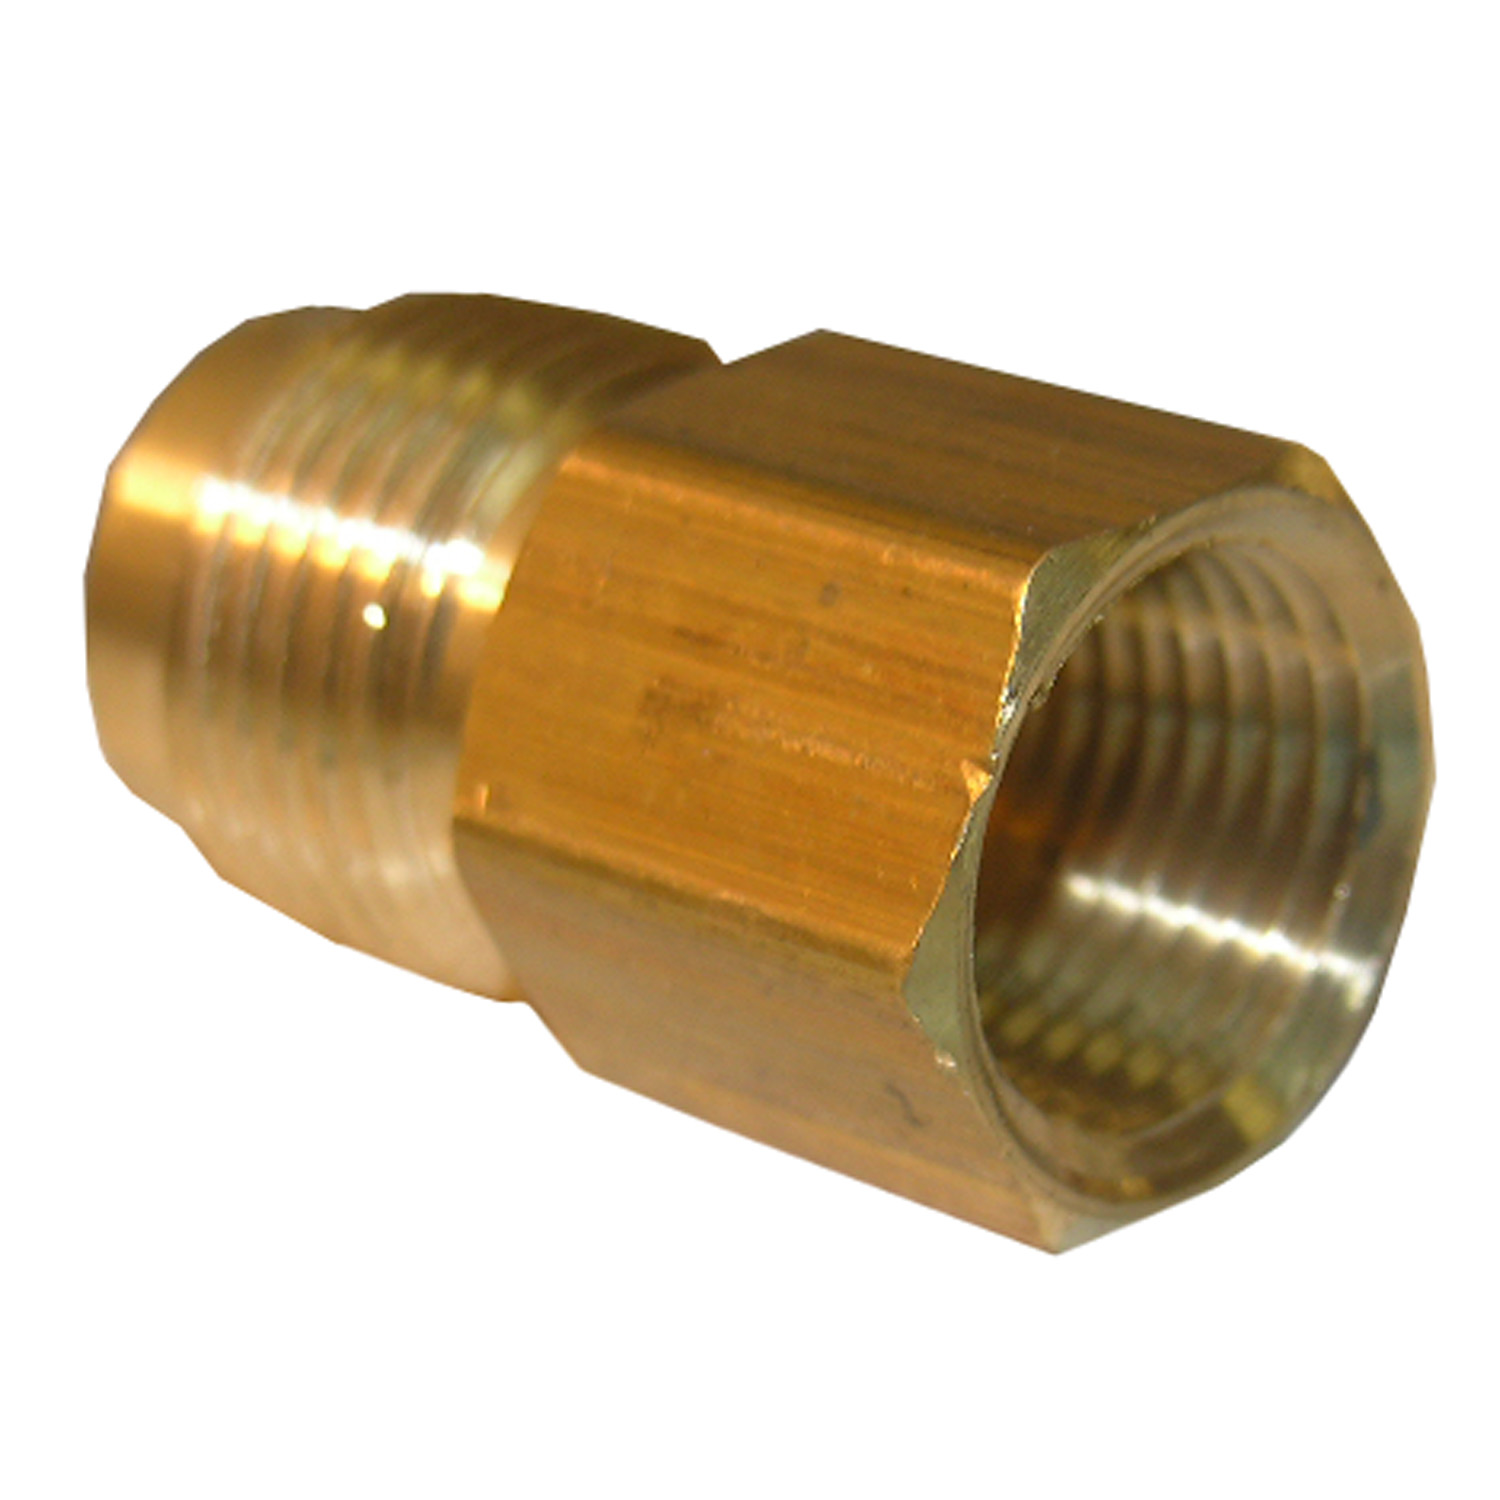 17-4647 Pipe Adapter, 1/2 x 3/8 in, Male Flare x FPT, Brass, 700 psi Pressure